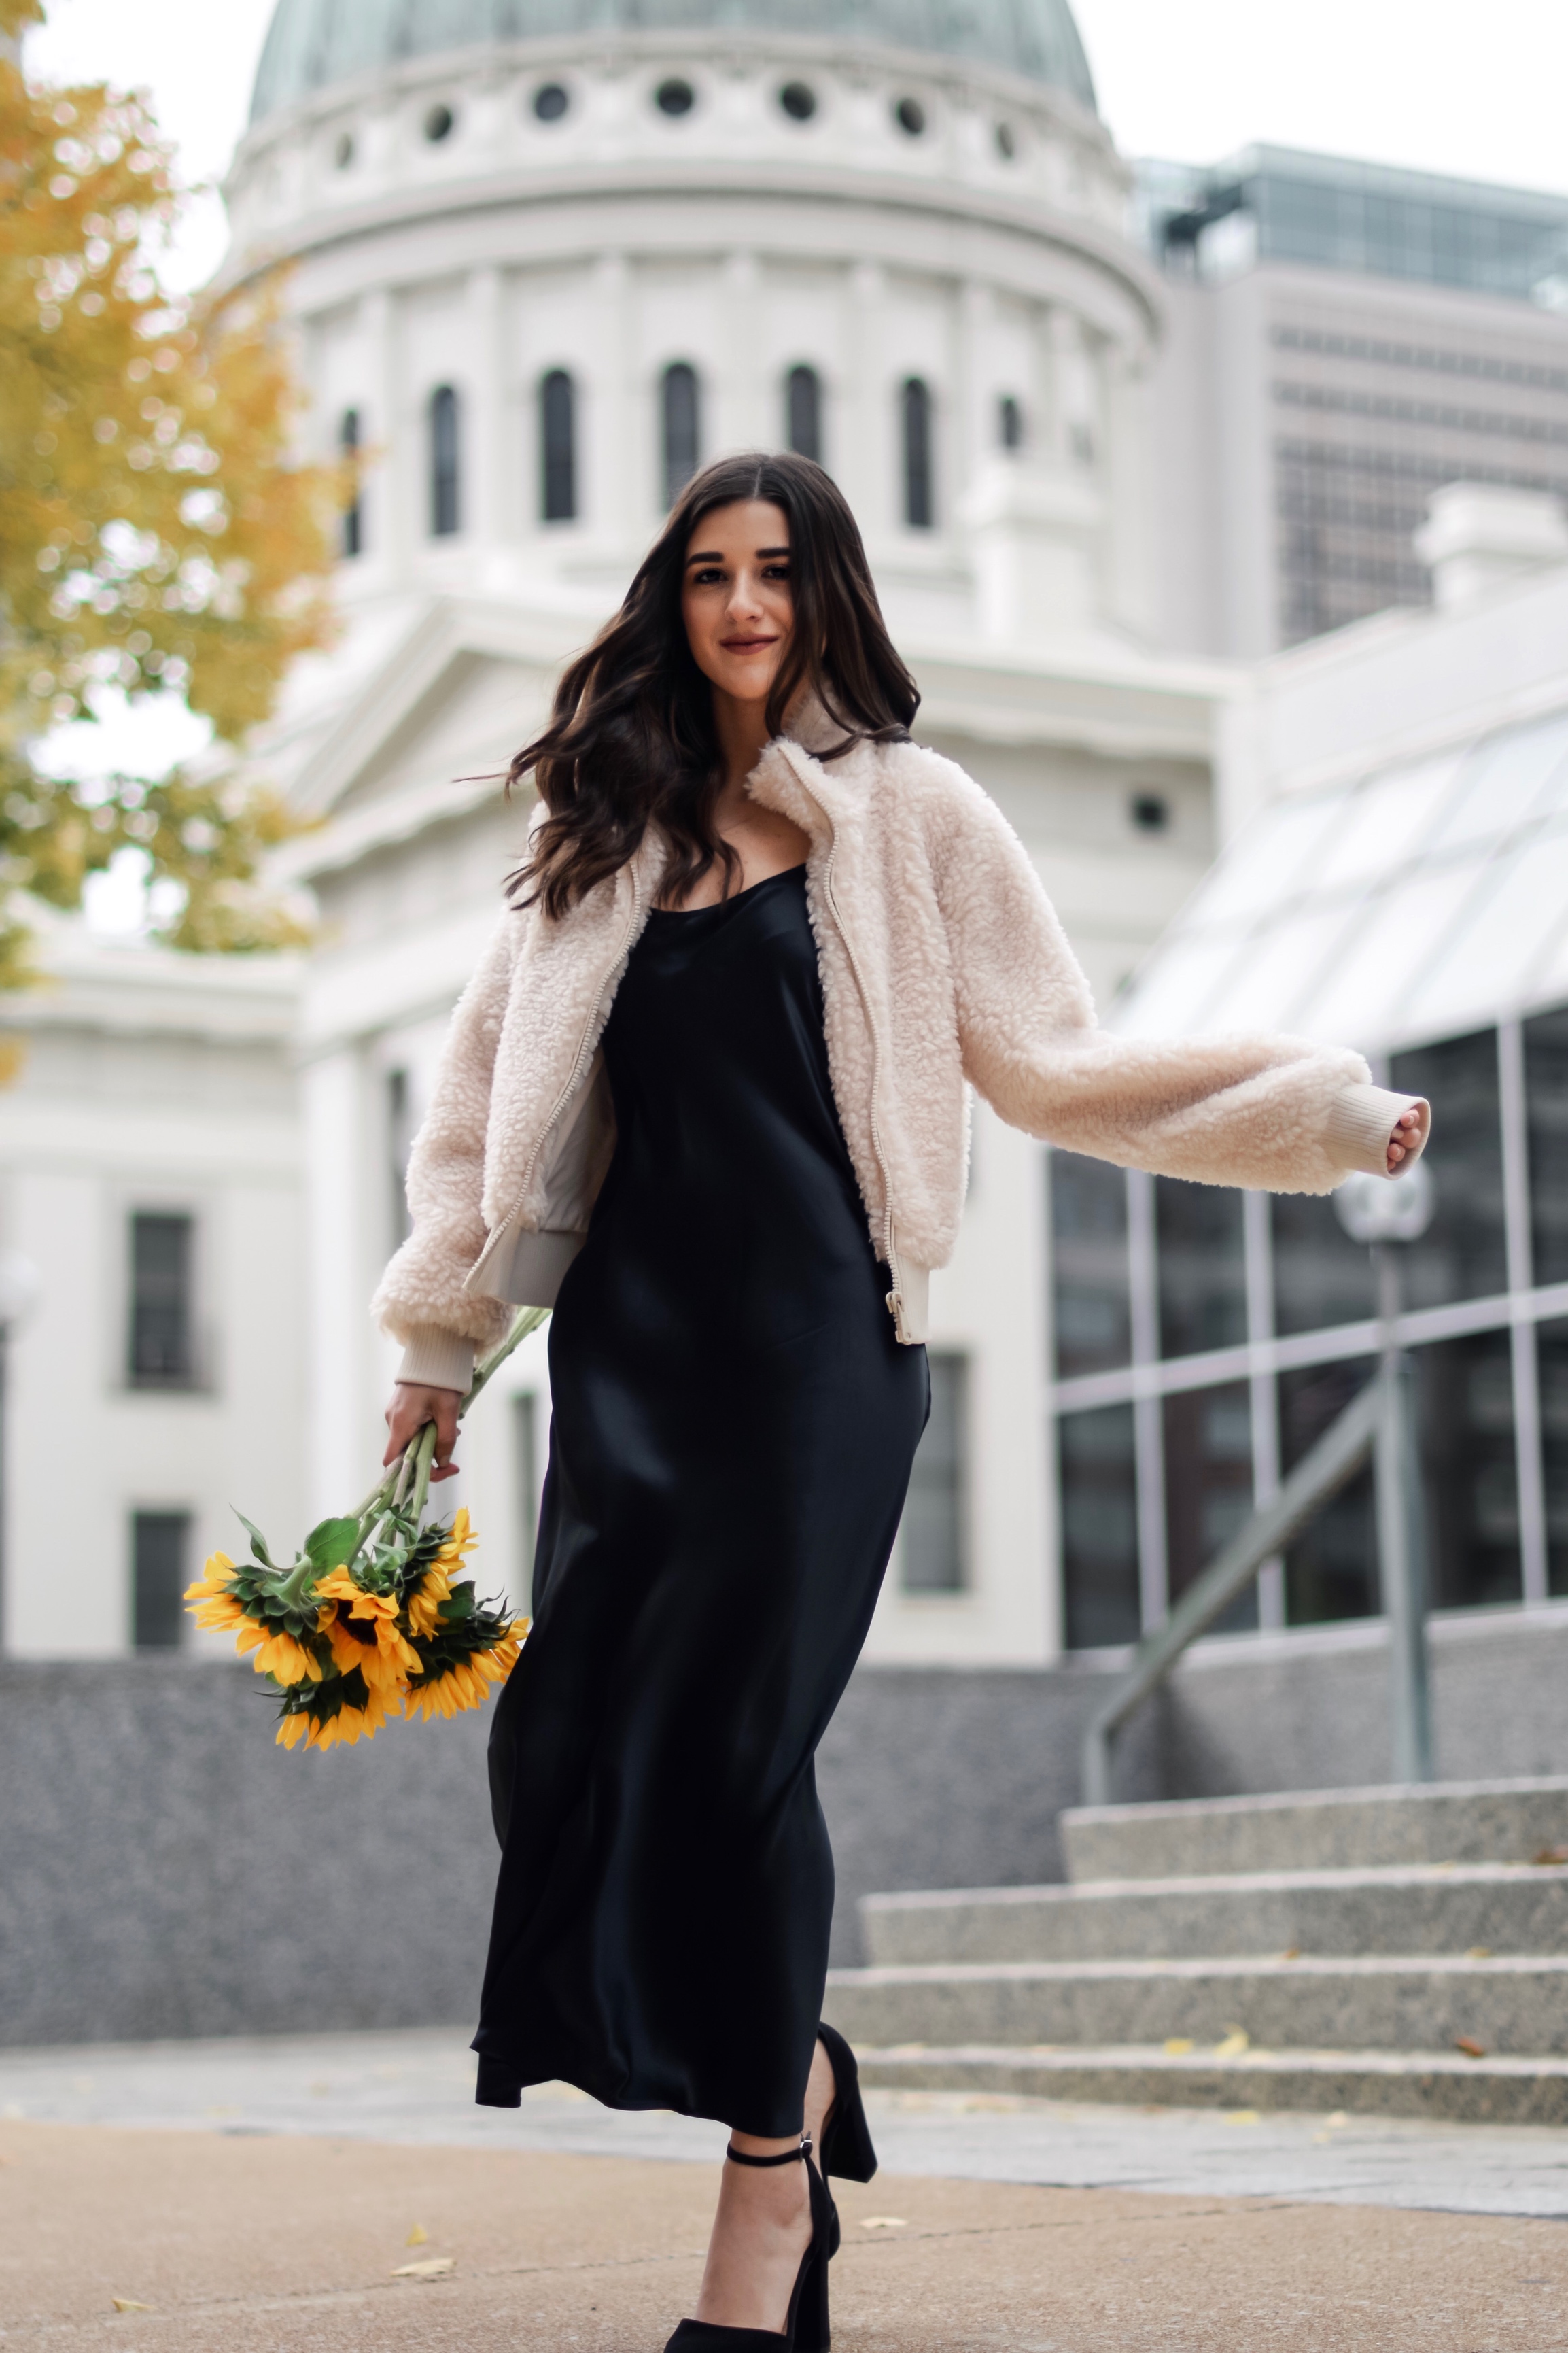 The 10 Most Frustrating Parts Of Brand Collabs Long Black Slip Dress Shearling Jacket Esther Santer Fashion Blog NYC Street Style Blogger Outfit OOTD  Trendy Shopping St. Louis Photoshoot Hometown Downtown Saint Louis Sunflowers Yellow Flowers Heels.jpg